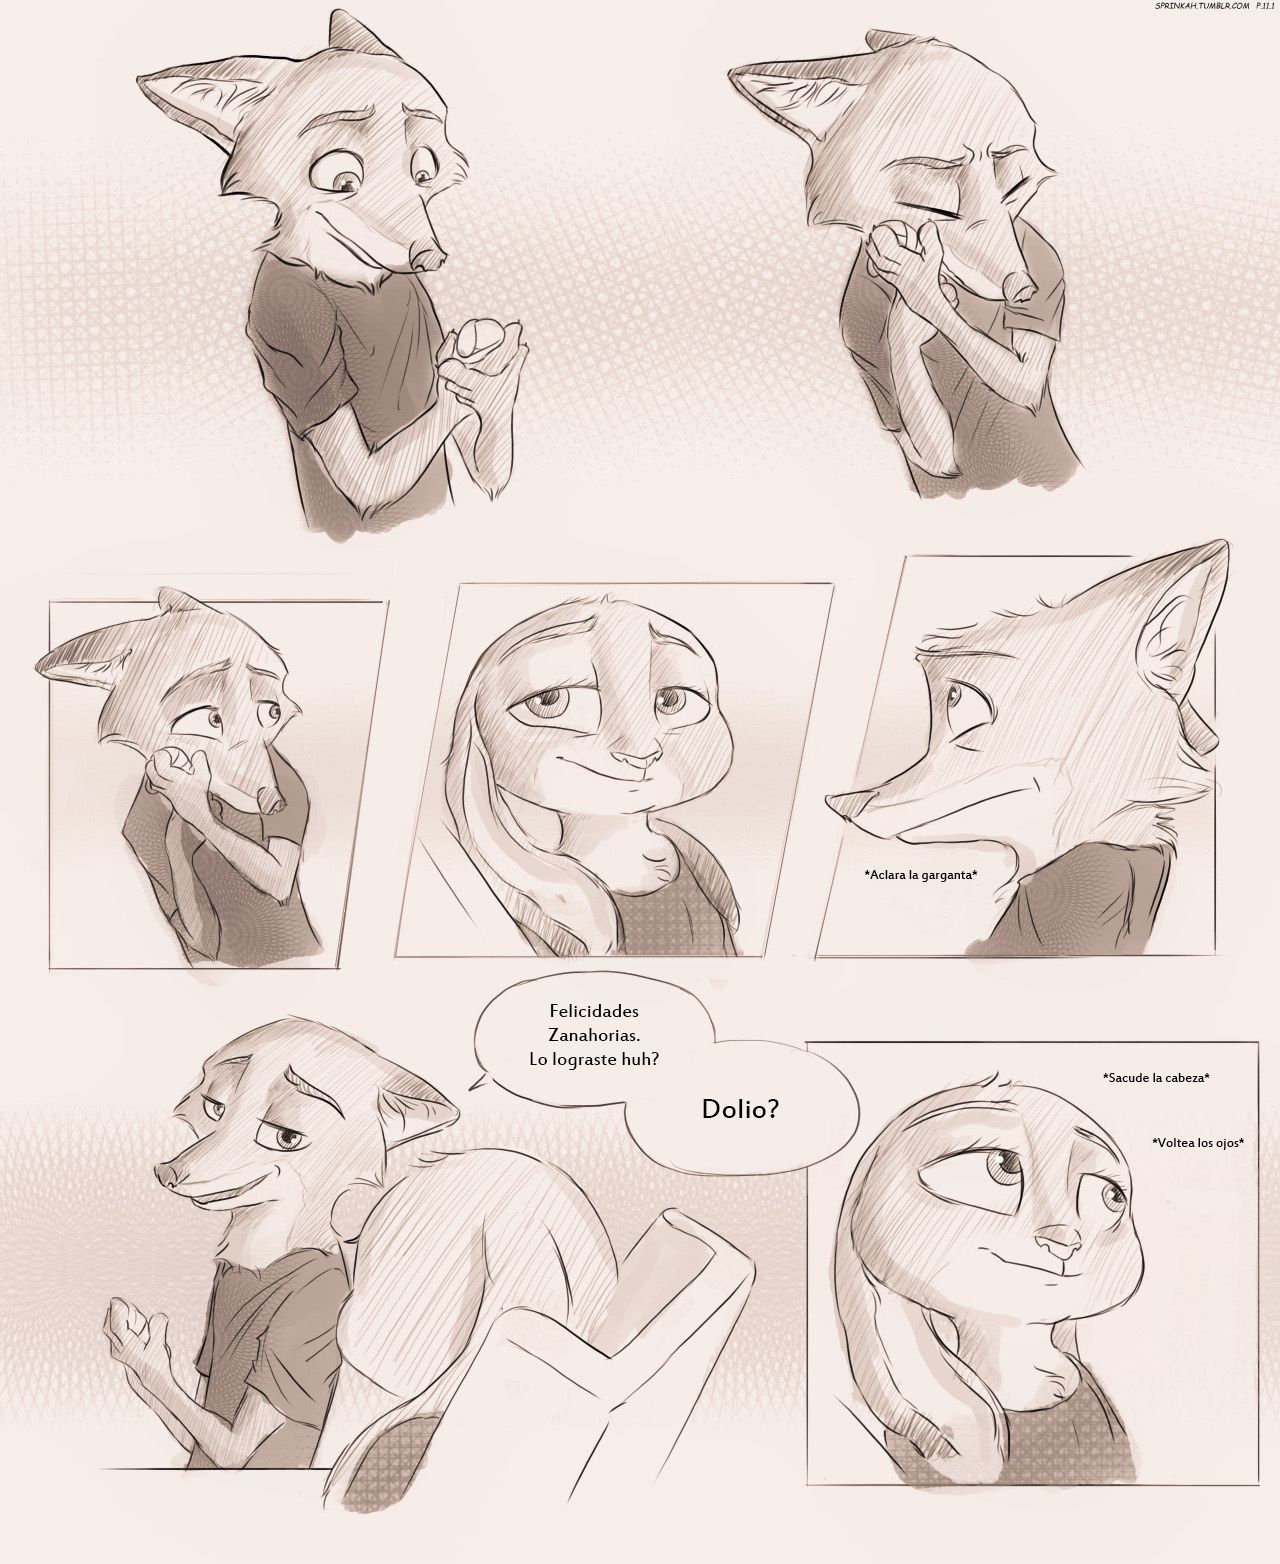 [Sprinkah] This is what true love looks like (Zootopia) (Spanish) (On Going) [Landsec] http://sprinkah.tumblr.com/ 17